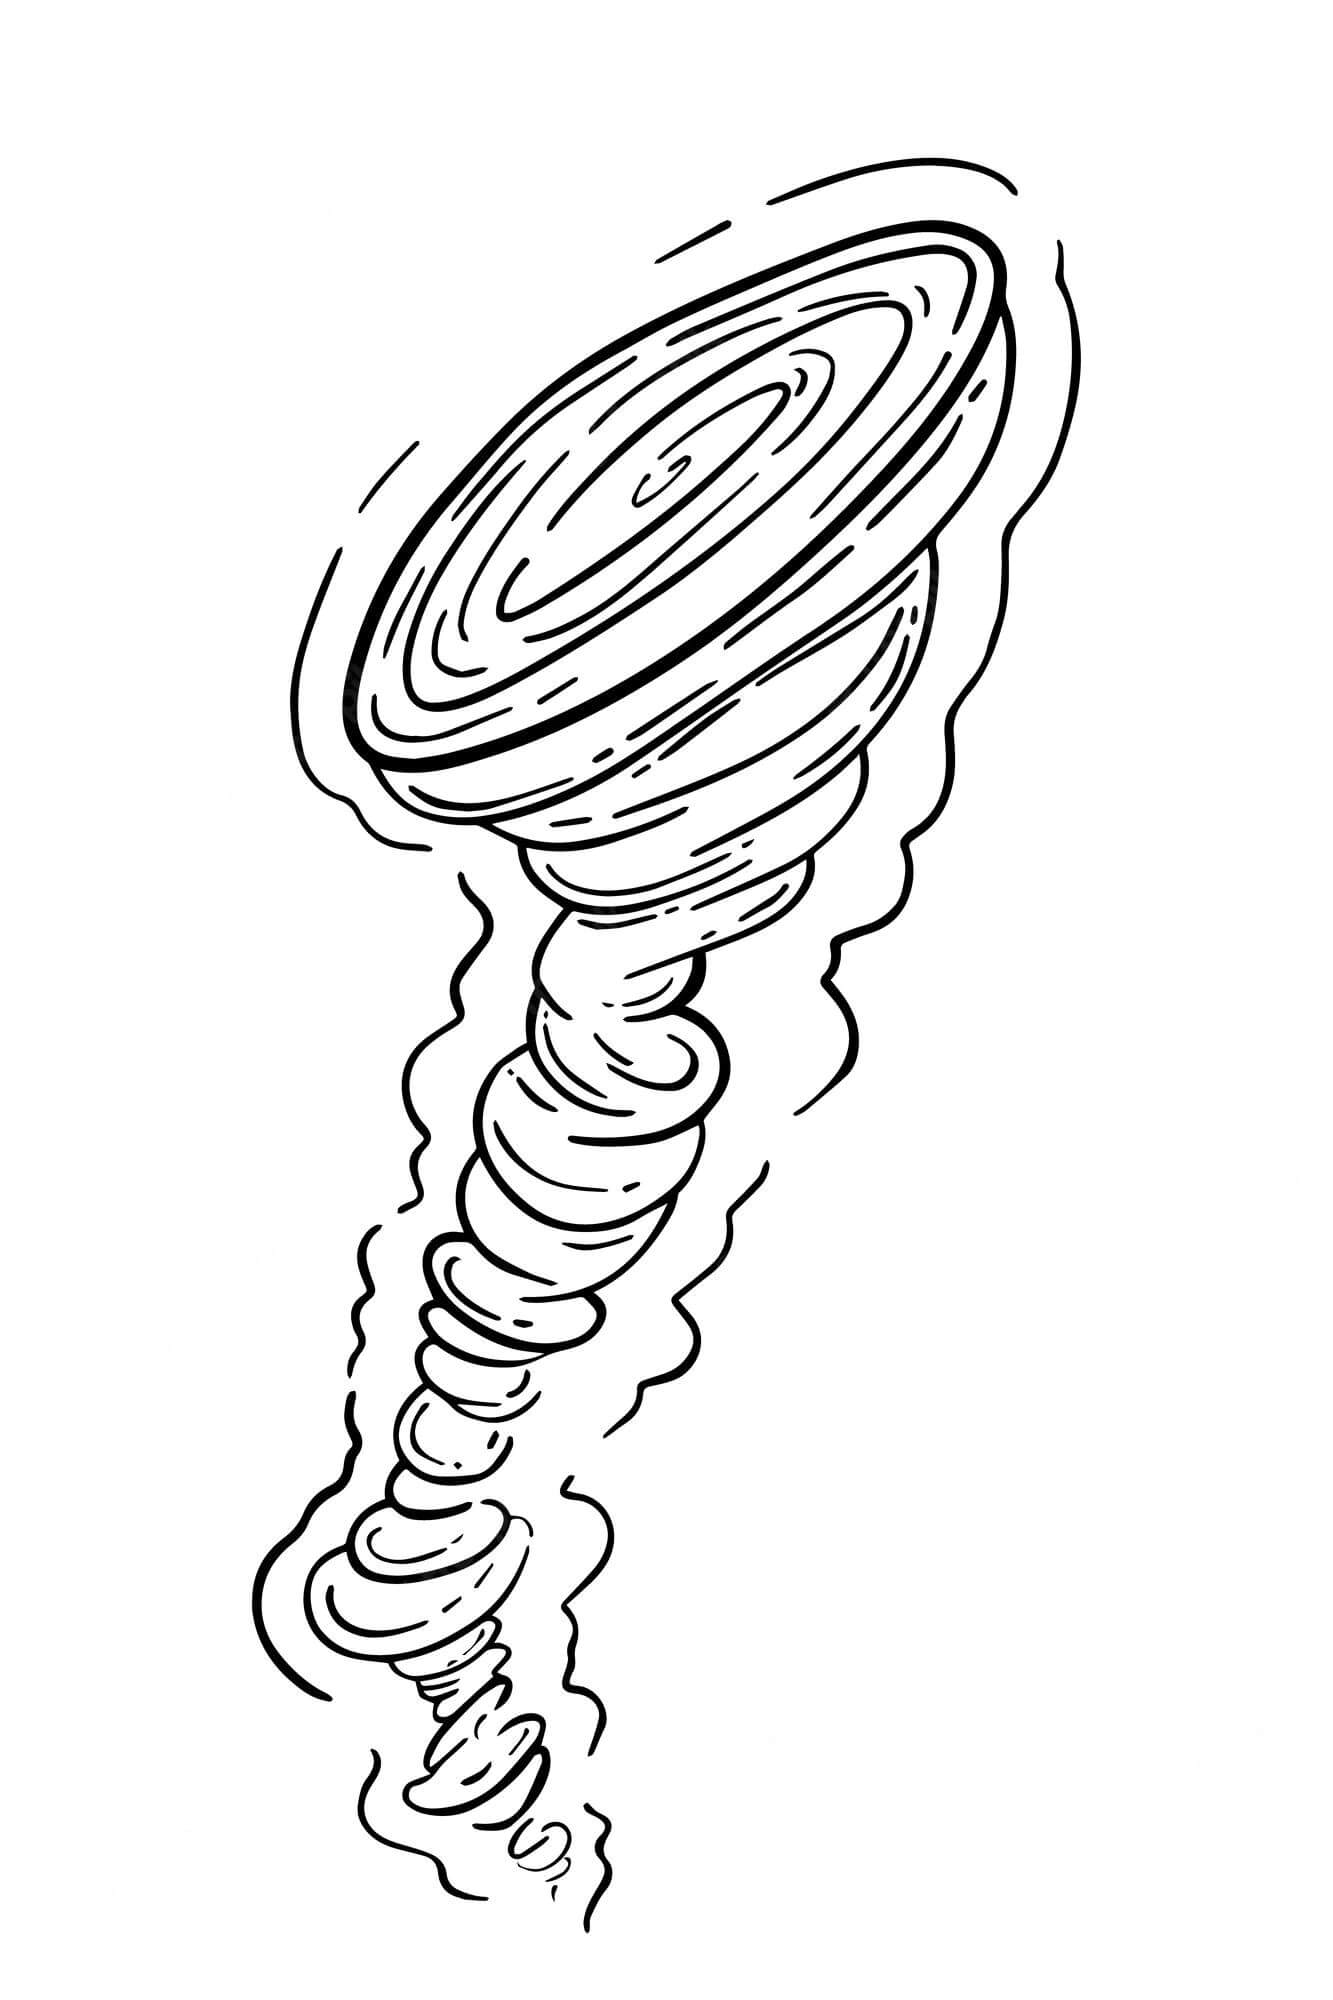 Tornade 1 coloring page